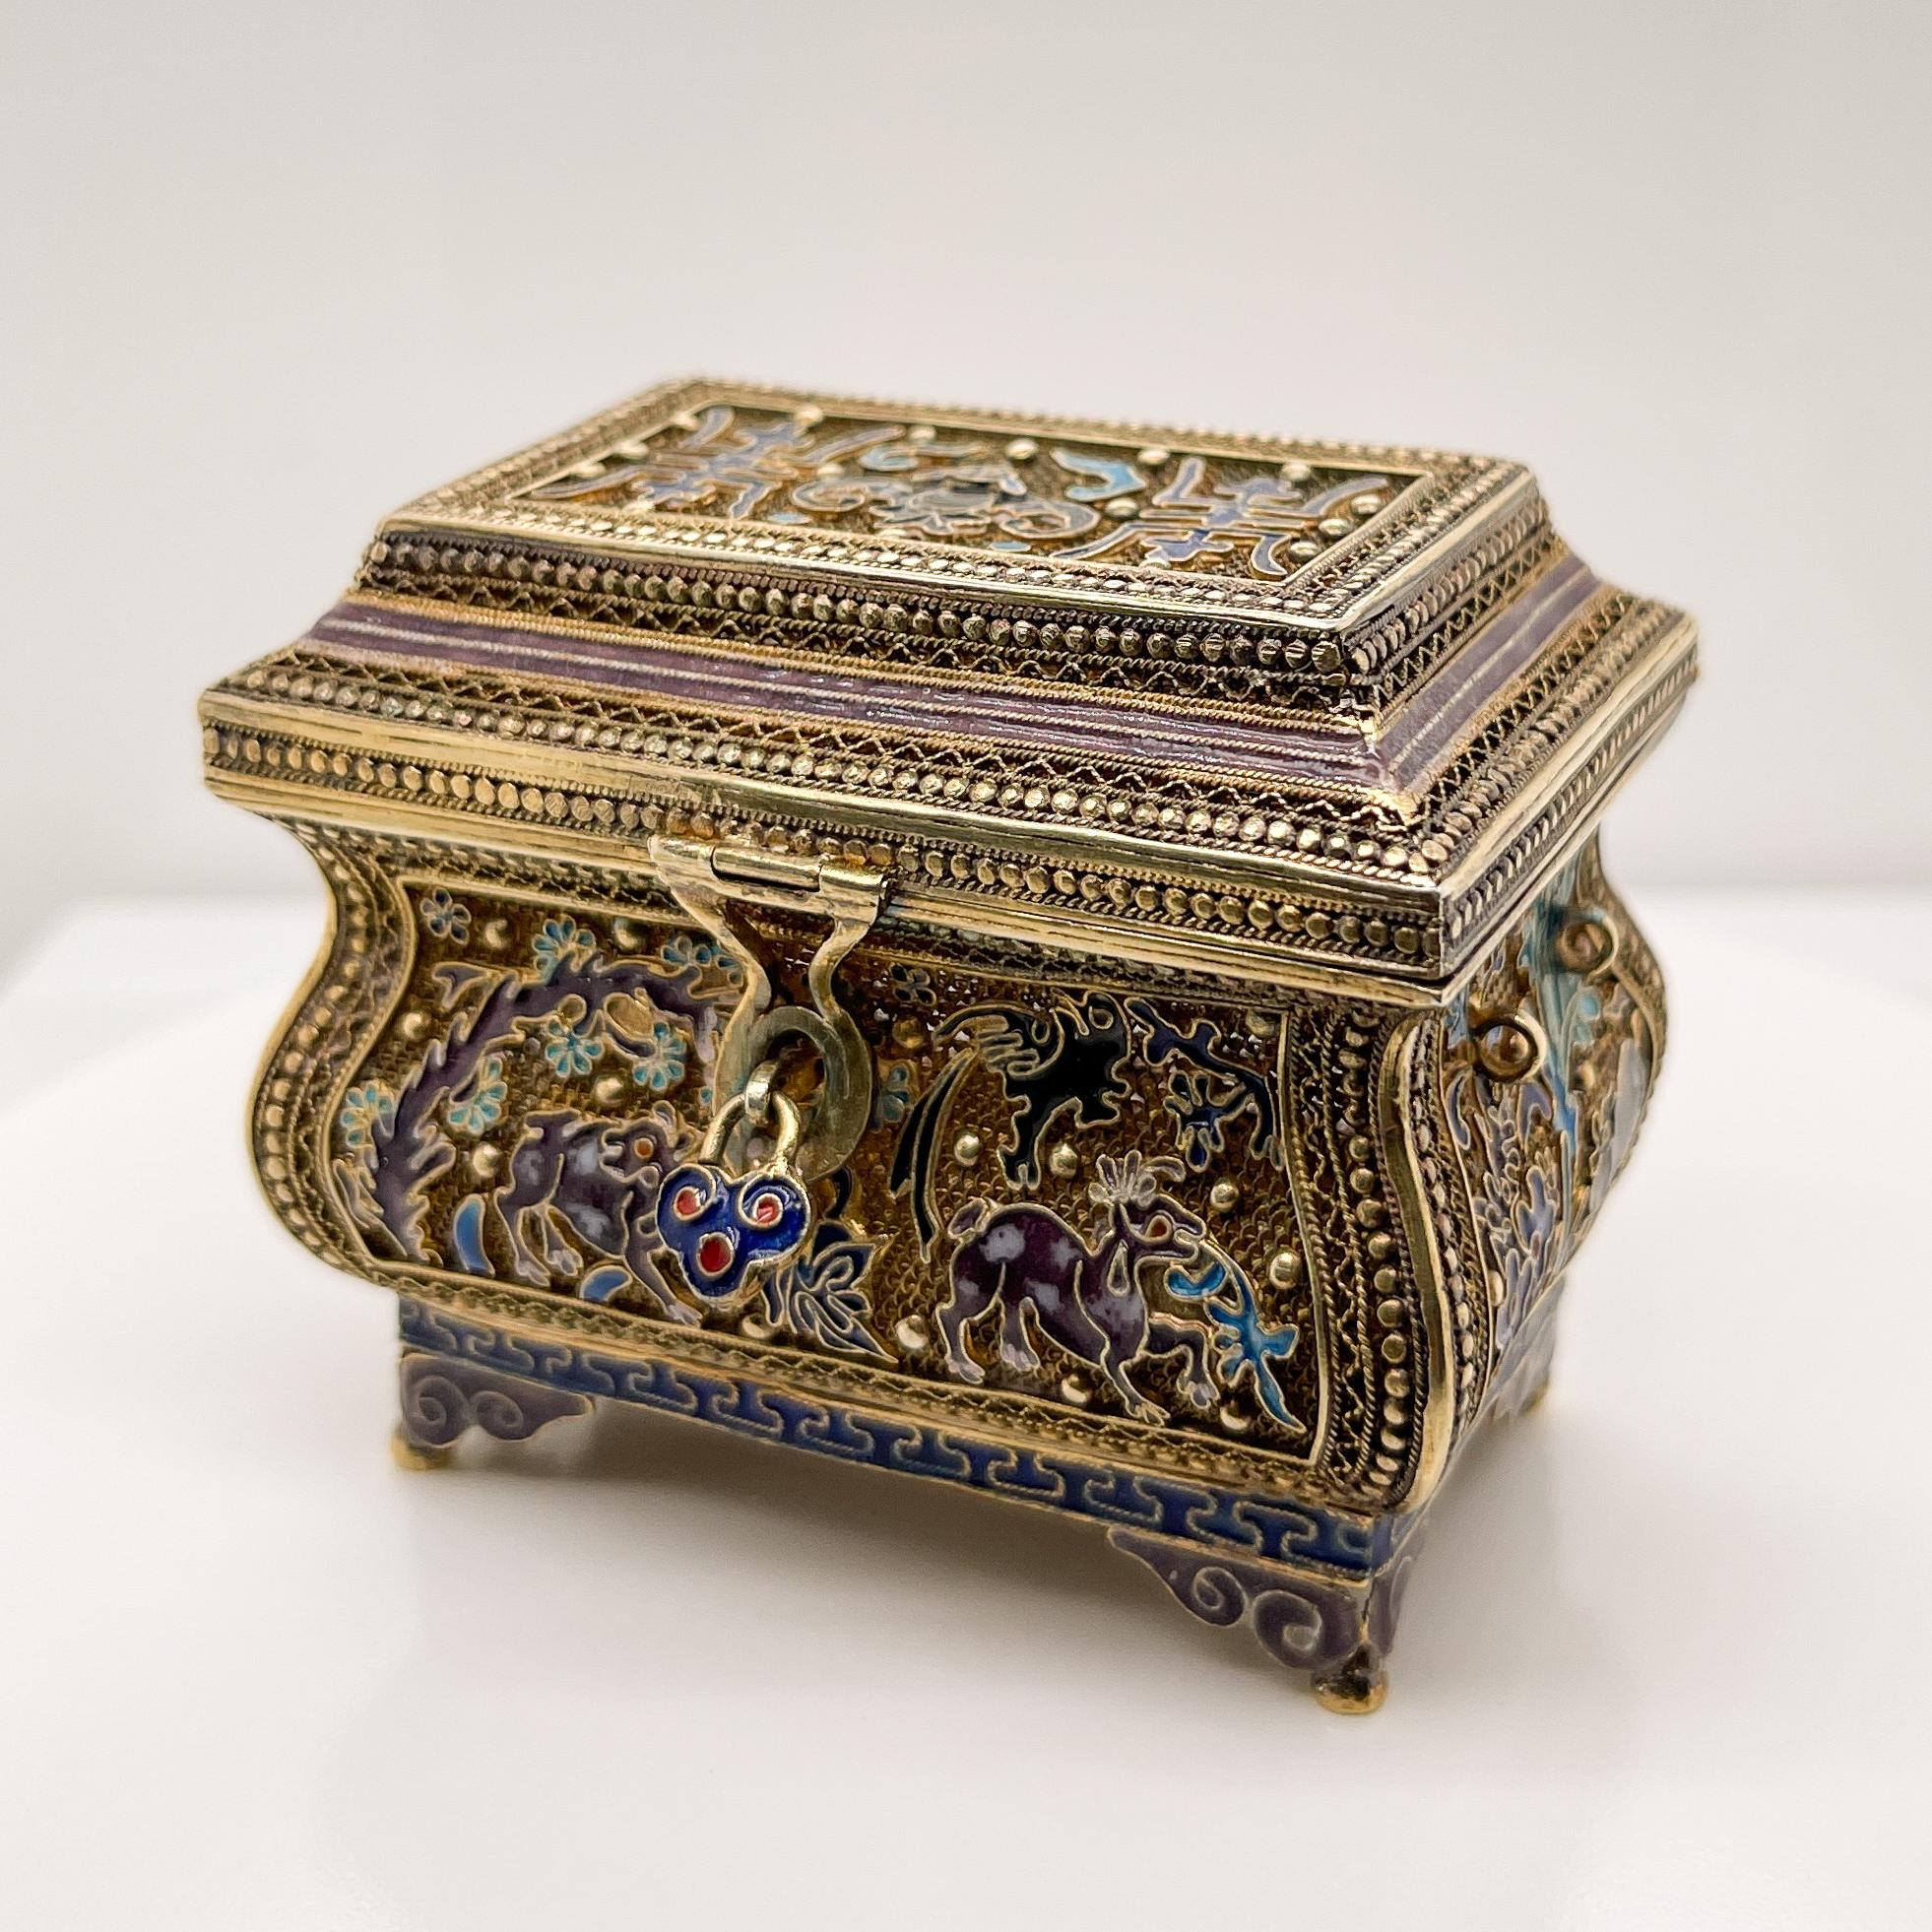 A fine vintage Chinese miniature box or treasure chest.

In gilt filigree silver and enamel. 

Eternally sealed with a faux lock. 

Simply a wonderful miniature Chinese objet d'art!

Date:
20th Century

Overall Condition:
It is in overall good,